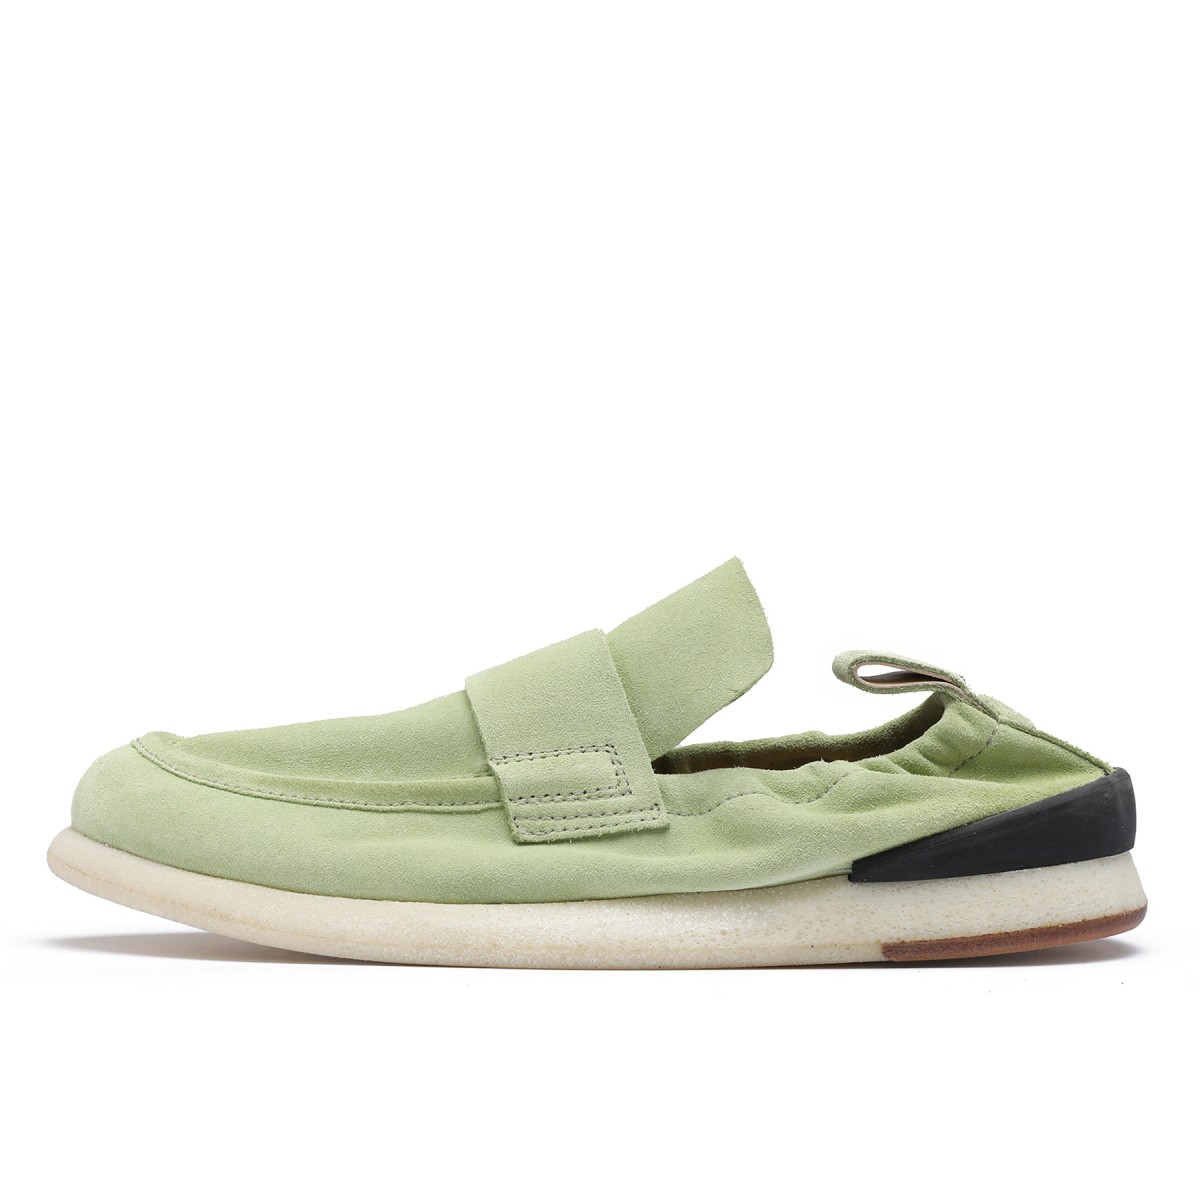 Light green suede loafers